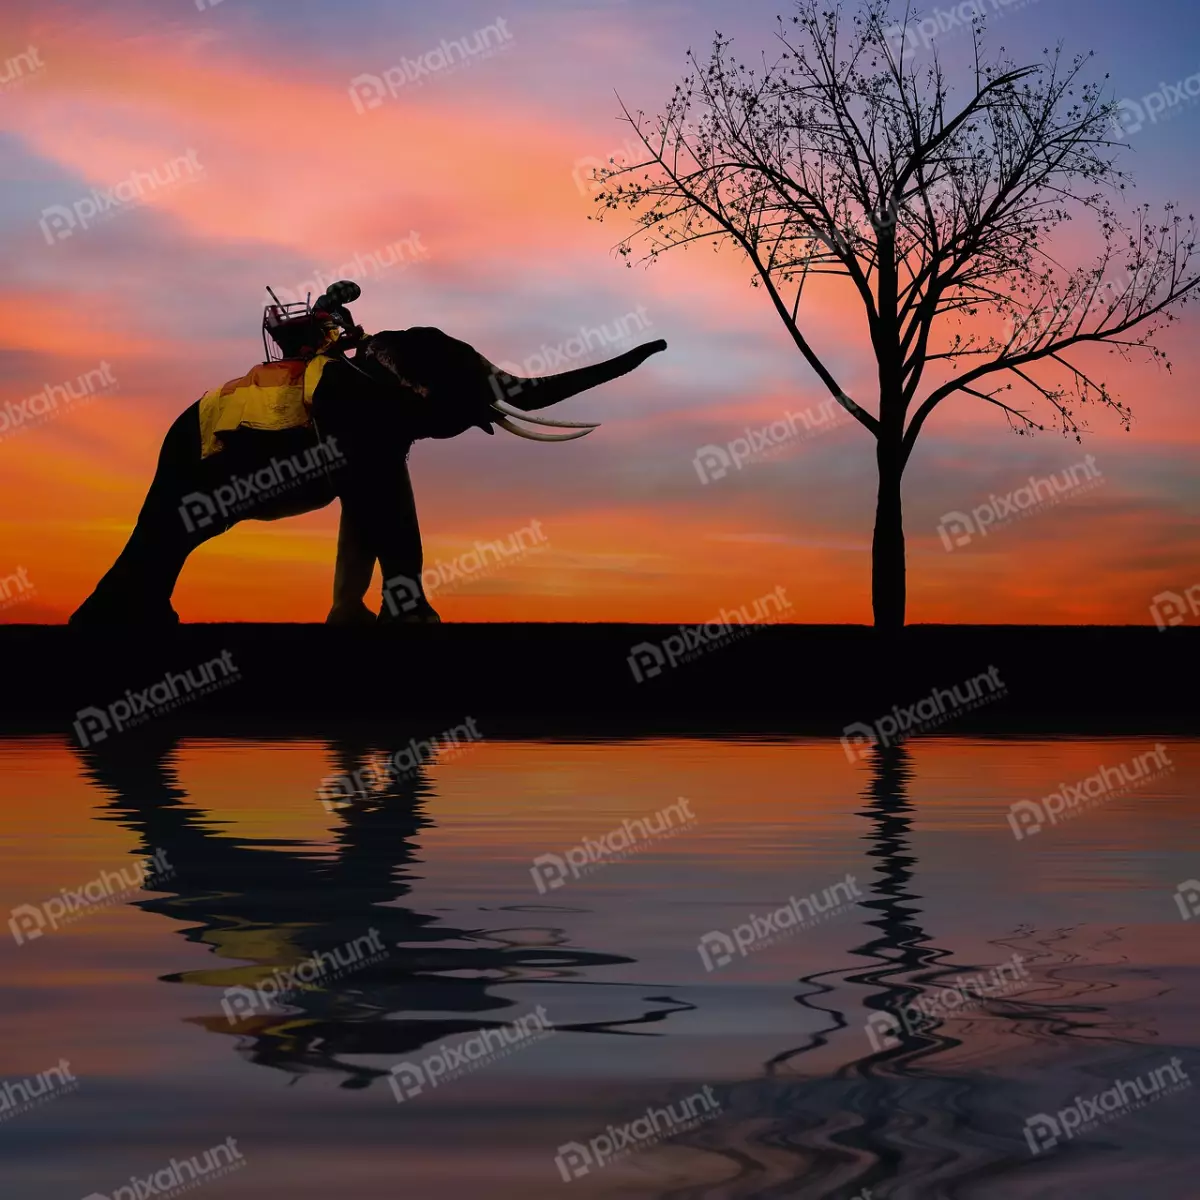 Free Premium Stock Photos A silhouette of an elephant with a mahout on its back, walking in front of a tree